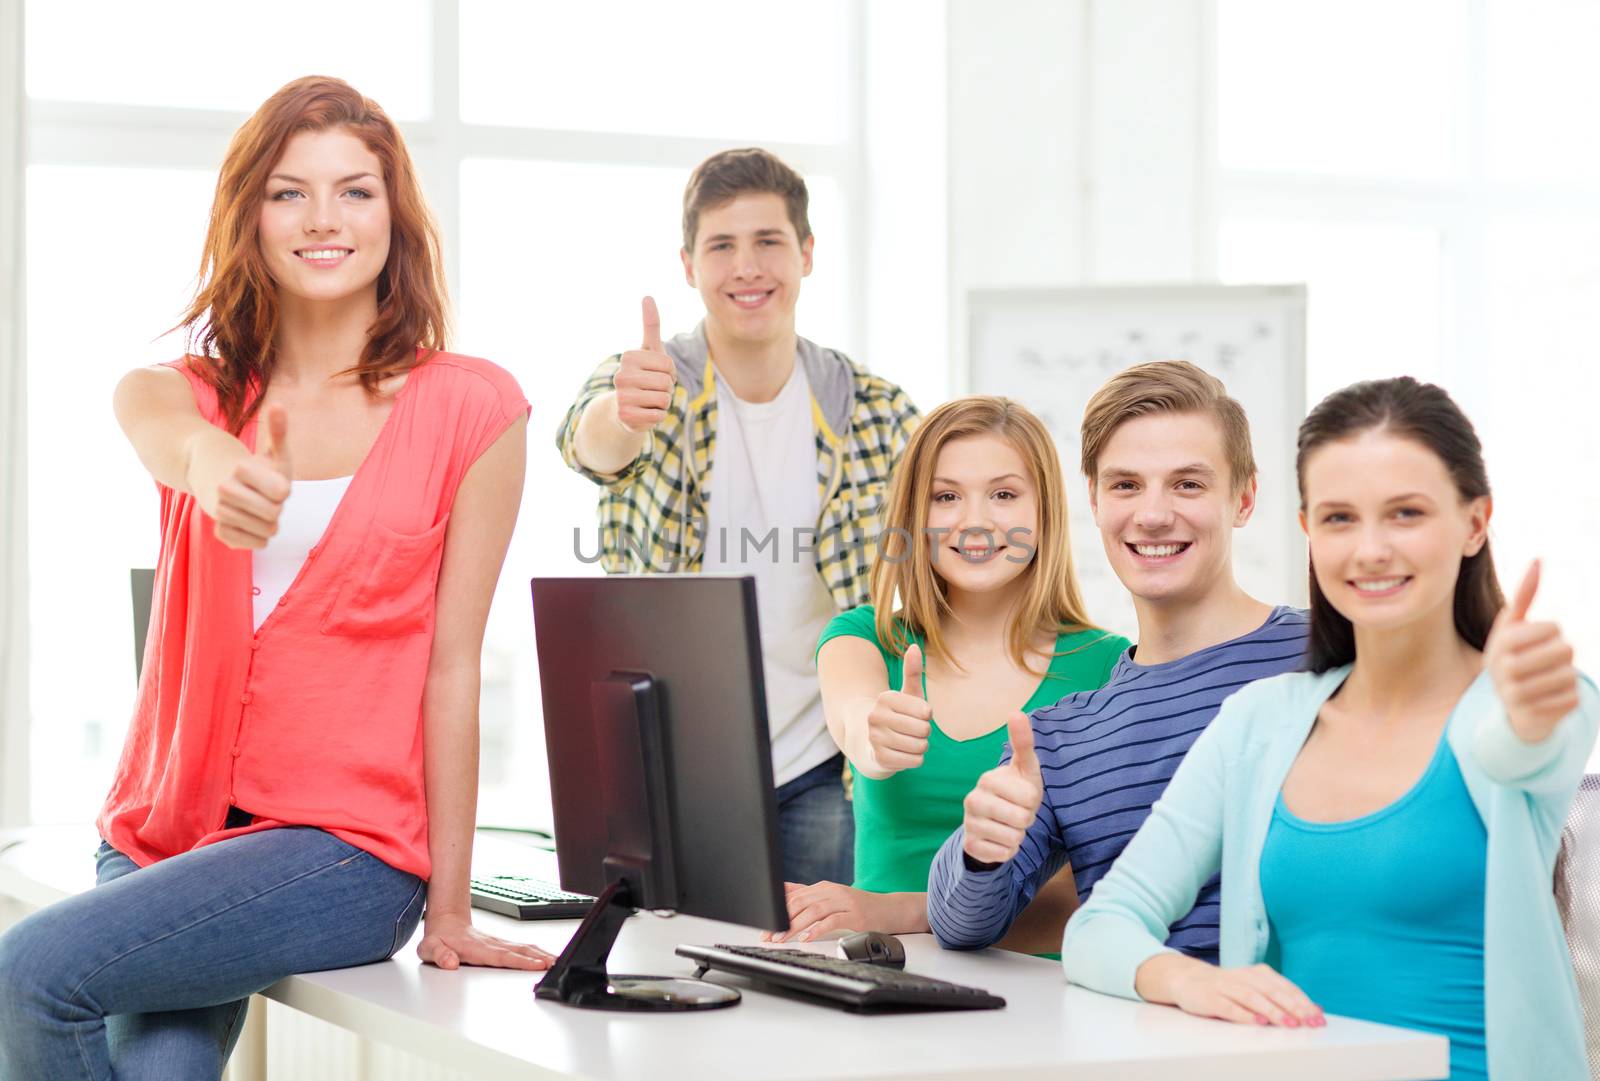 group of smiling students showing thumbs up by dolgachov